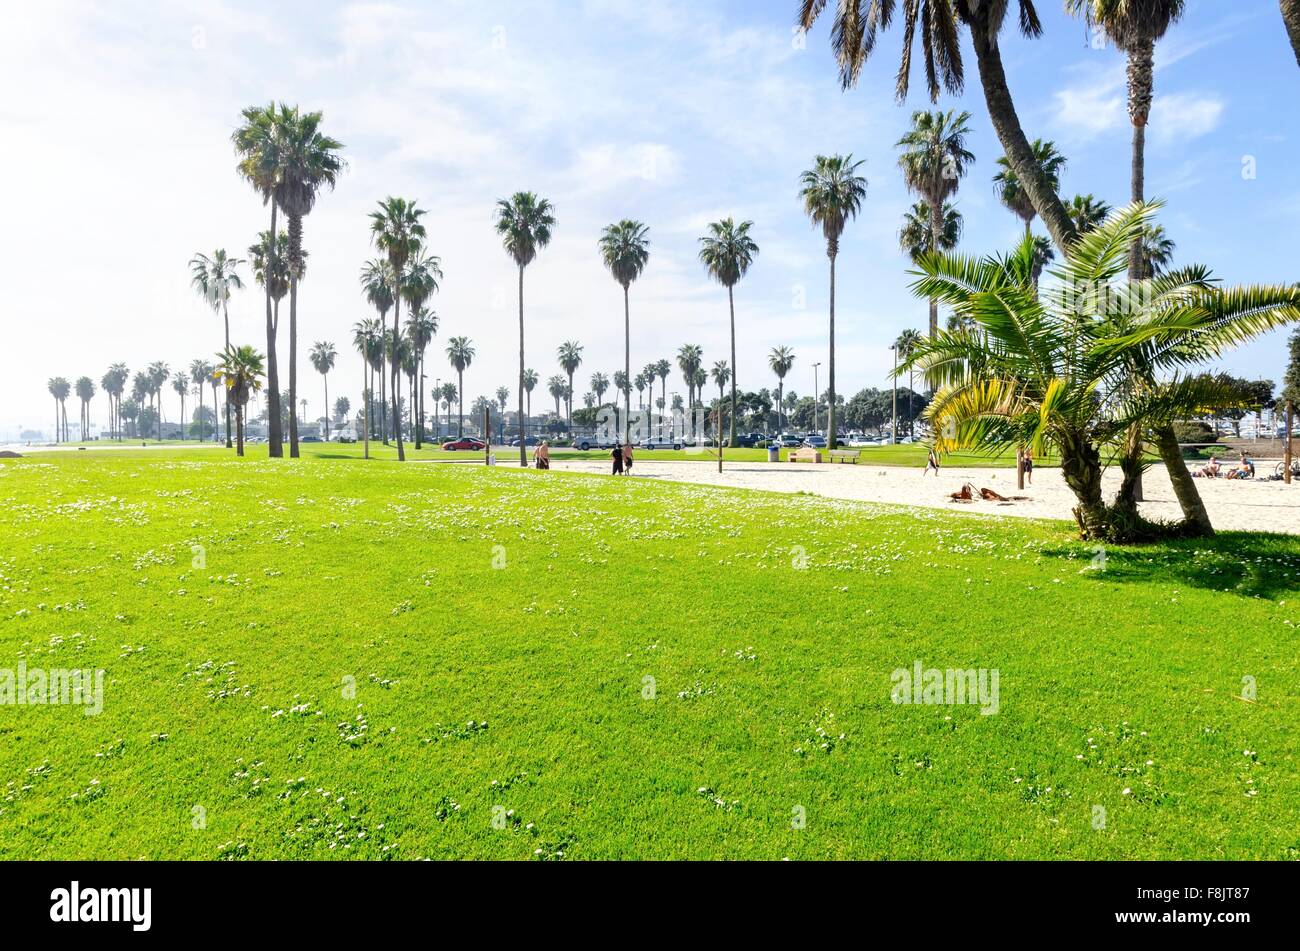 The Bonita cove park in southern Mission Bay over the Pacific beach in San Diego, California in the United States of America. A Stock Photo